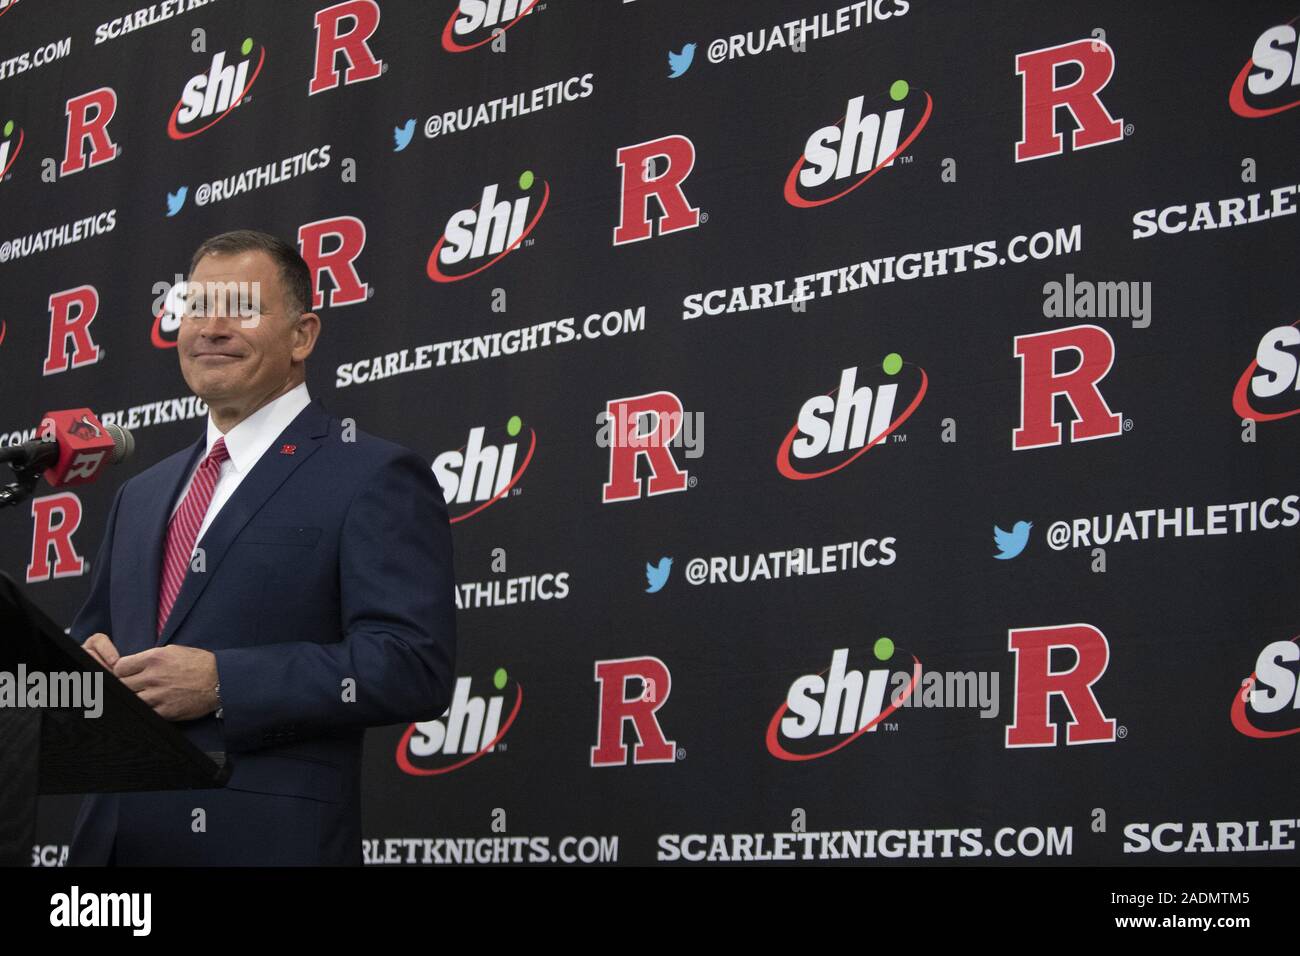 Piscataway, New Jersey, USA. 4th Dec, 2019. Rutgers Head coach GREG SCHIANO appears during a press conference at the Hale Center in Piscataway, New Jersey. SCHIANO was Rutgers head coach from 2000- 2011. SCHIANO Returns to Rutgers coaching in the NFL and other College teams. Credit: Brian Branch Price/ZUMA Wire/Alamy Live News Stock Photo